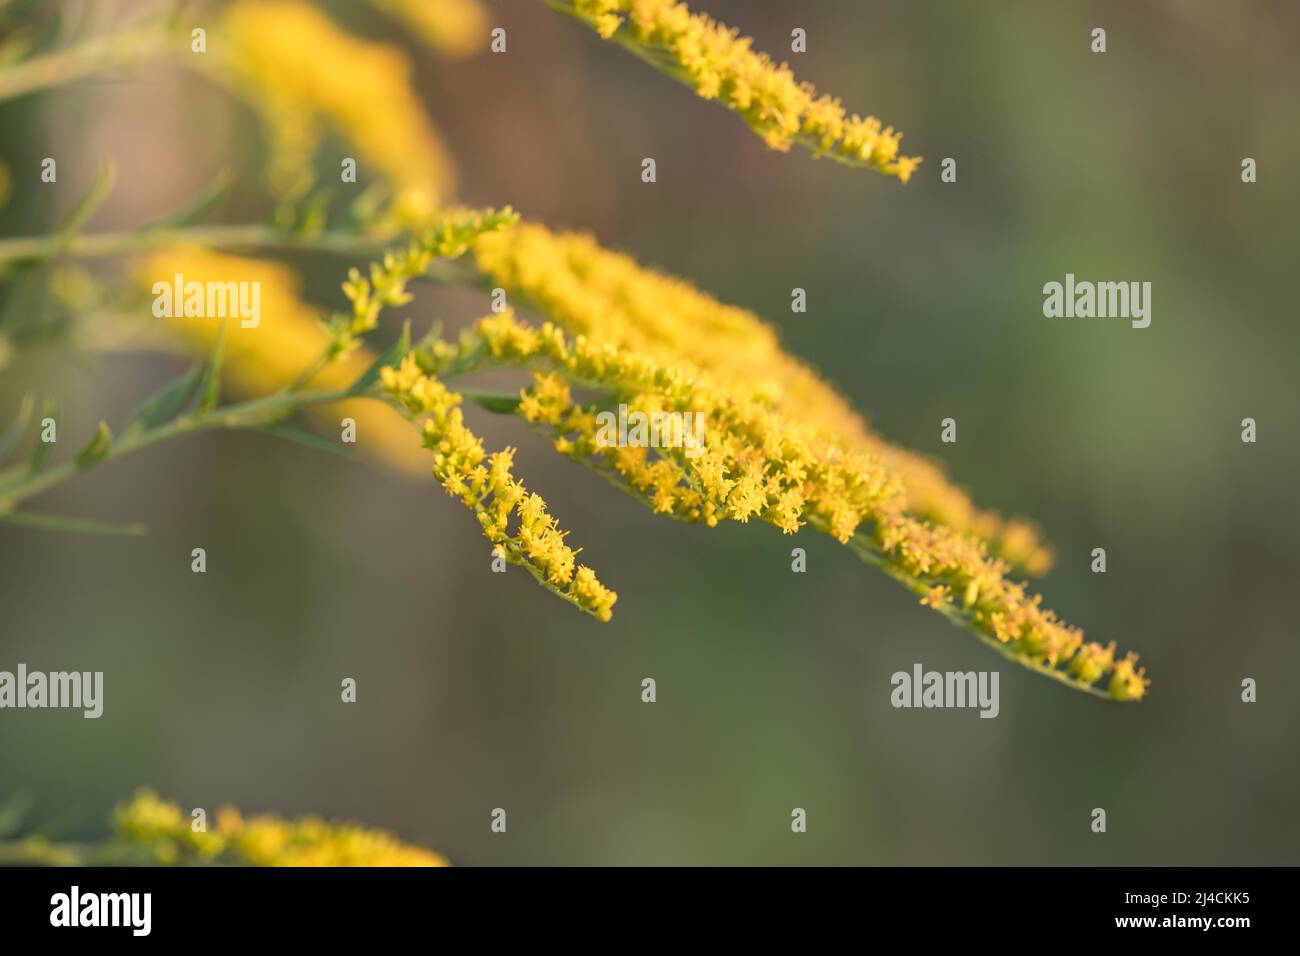 Canada goldenrod (Solidago canadensis), invasive plant blooms in sunshine in the garden, Velbert, Germany Stock Photo